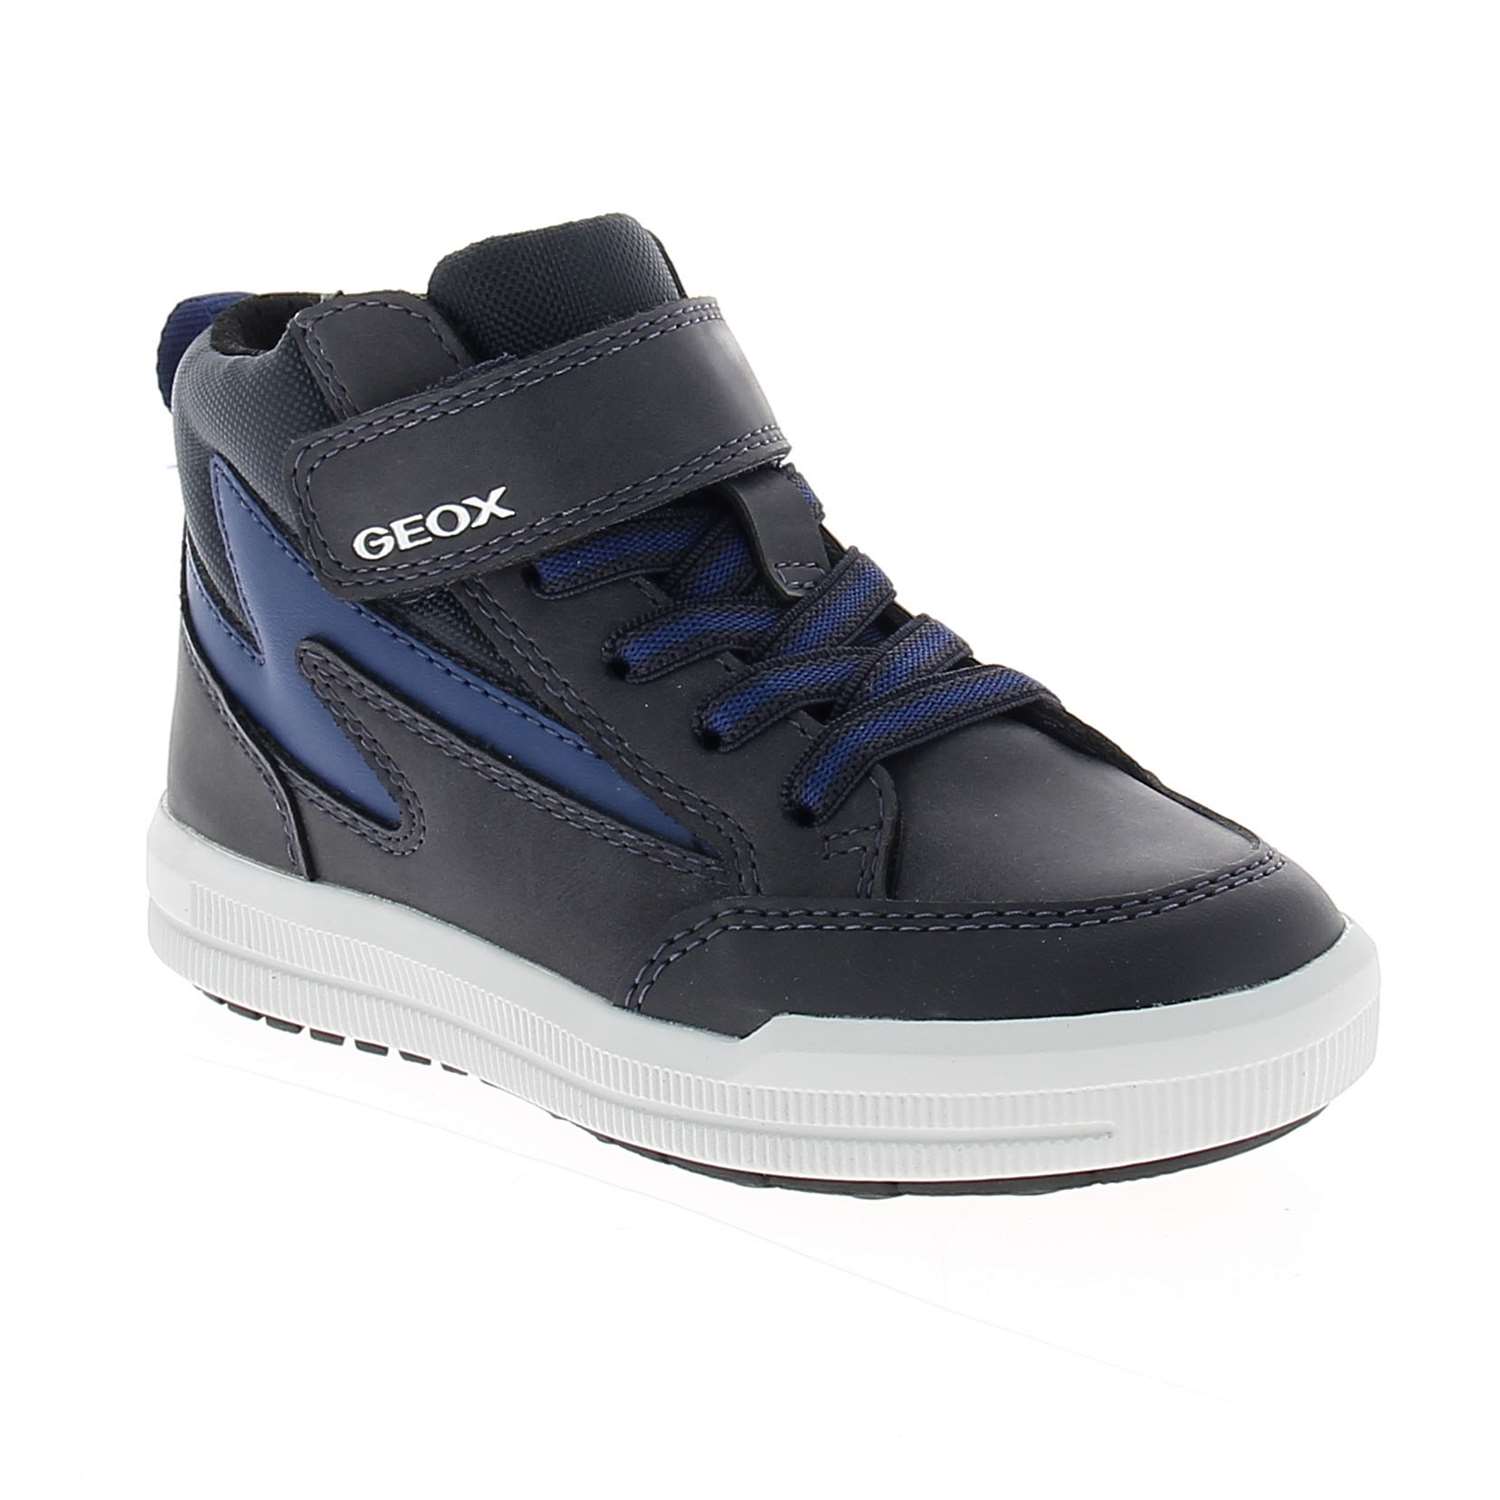 01 - ARZACH - GEOX - Chaussures montantes - Synthétique